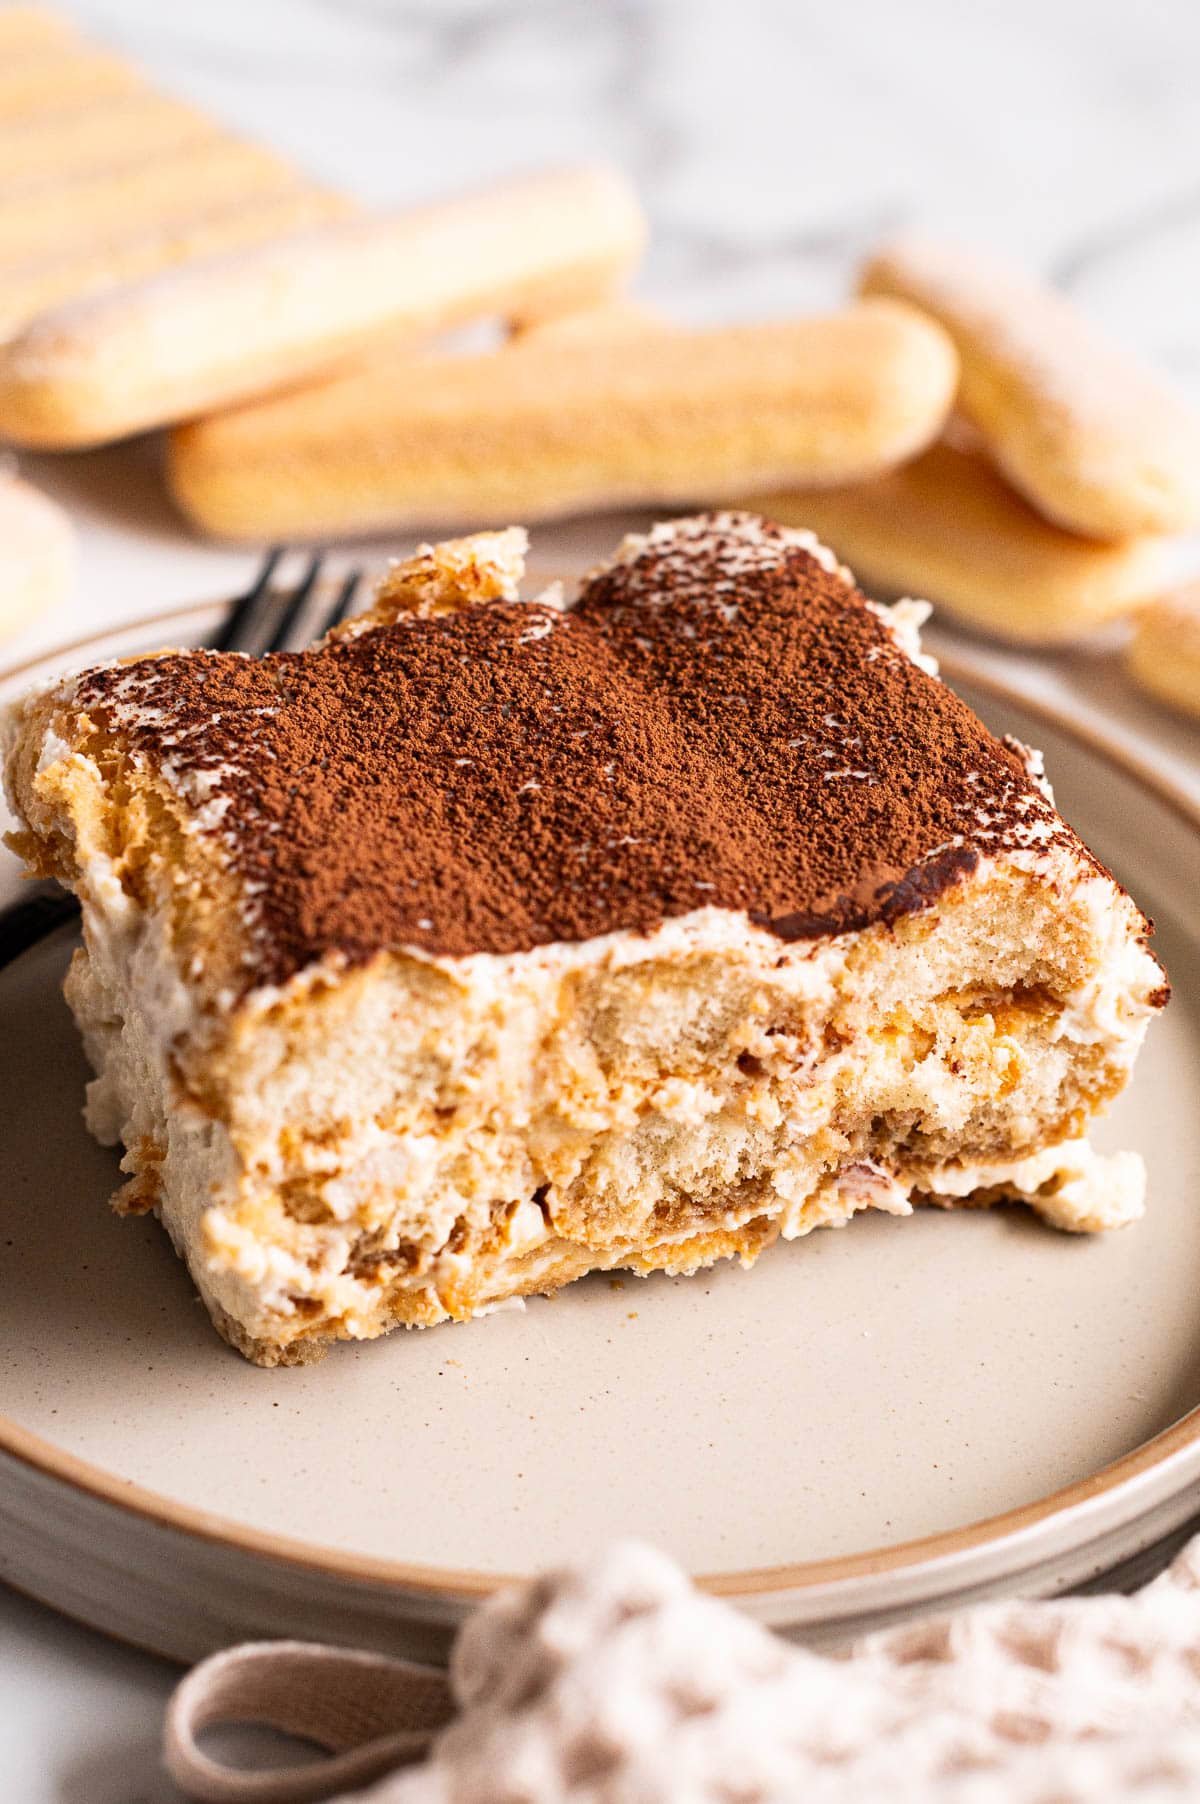 A slice of cottage cheese tiramisu served on a plate. Lady fingers on the counter.